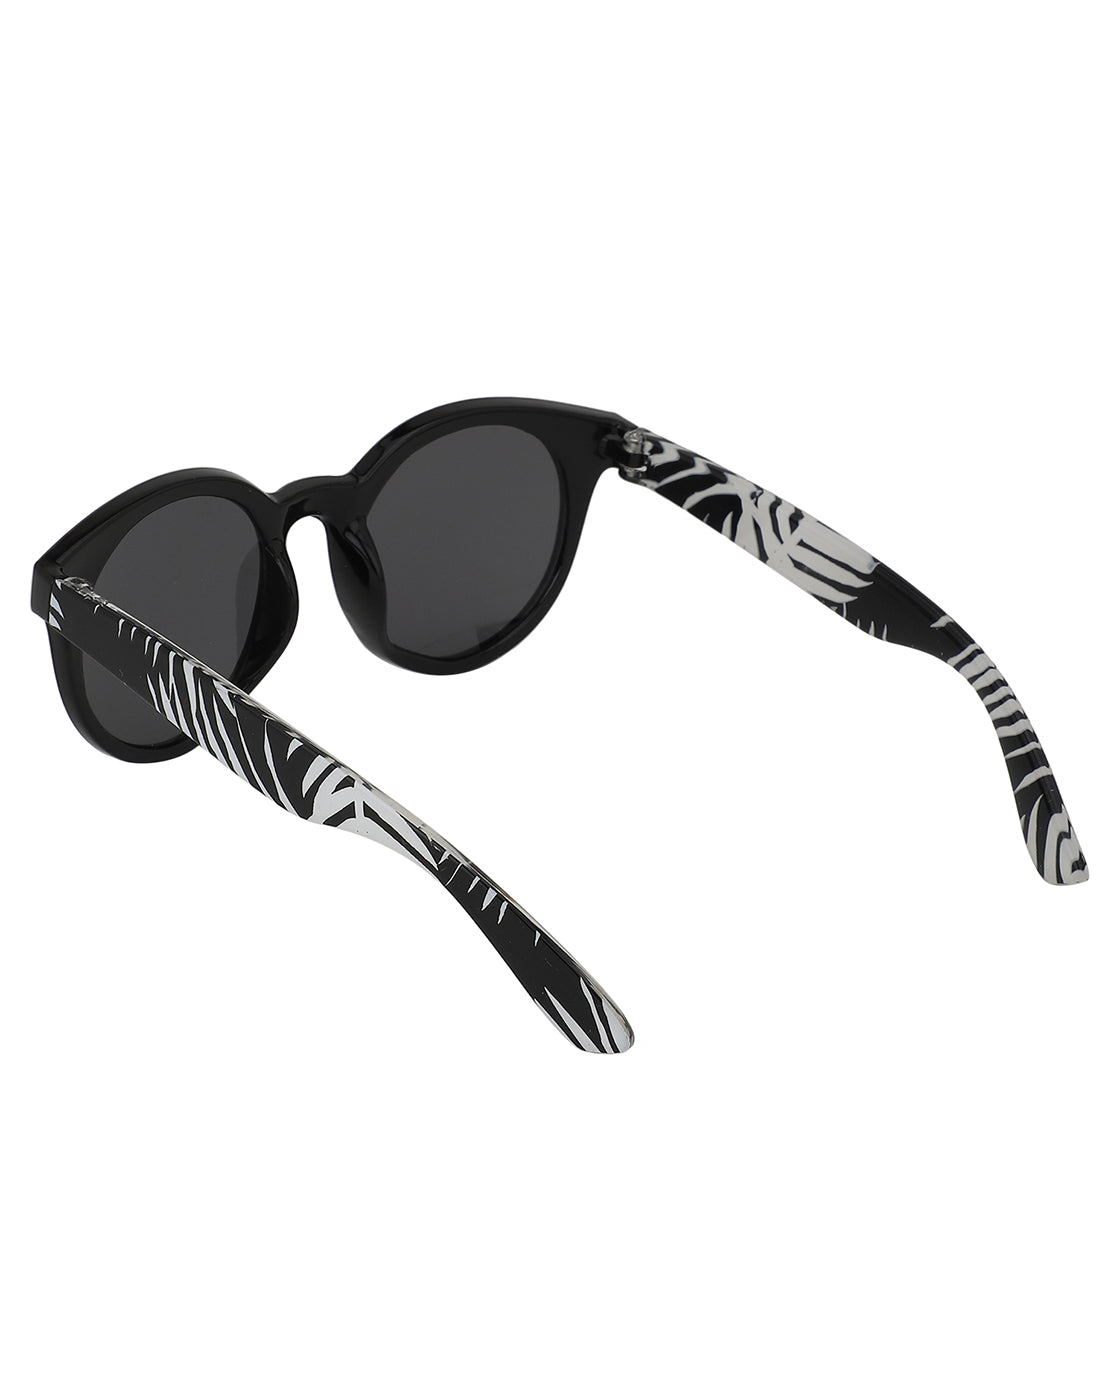 Buy Cloud Gray Cateye Sunglasses for Men at French Crown